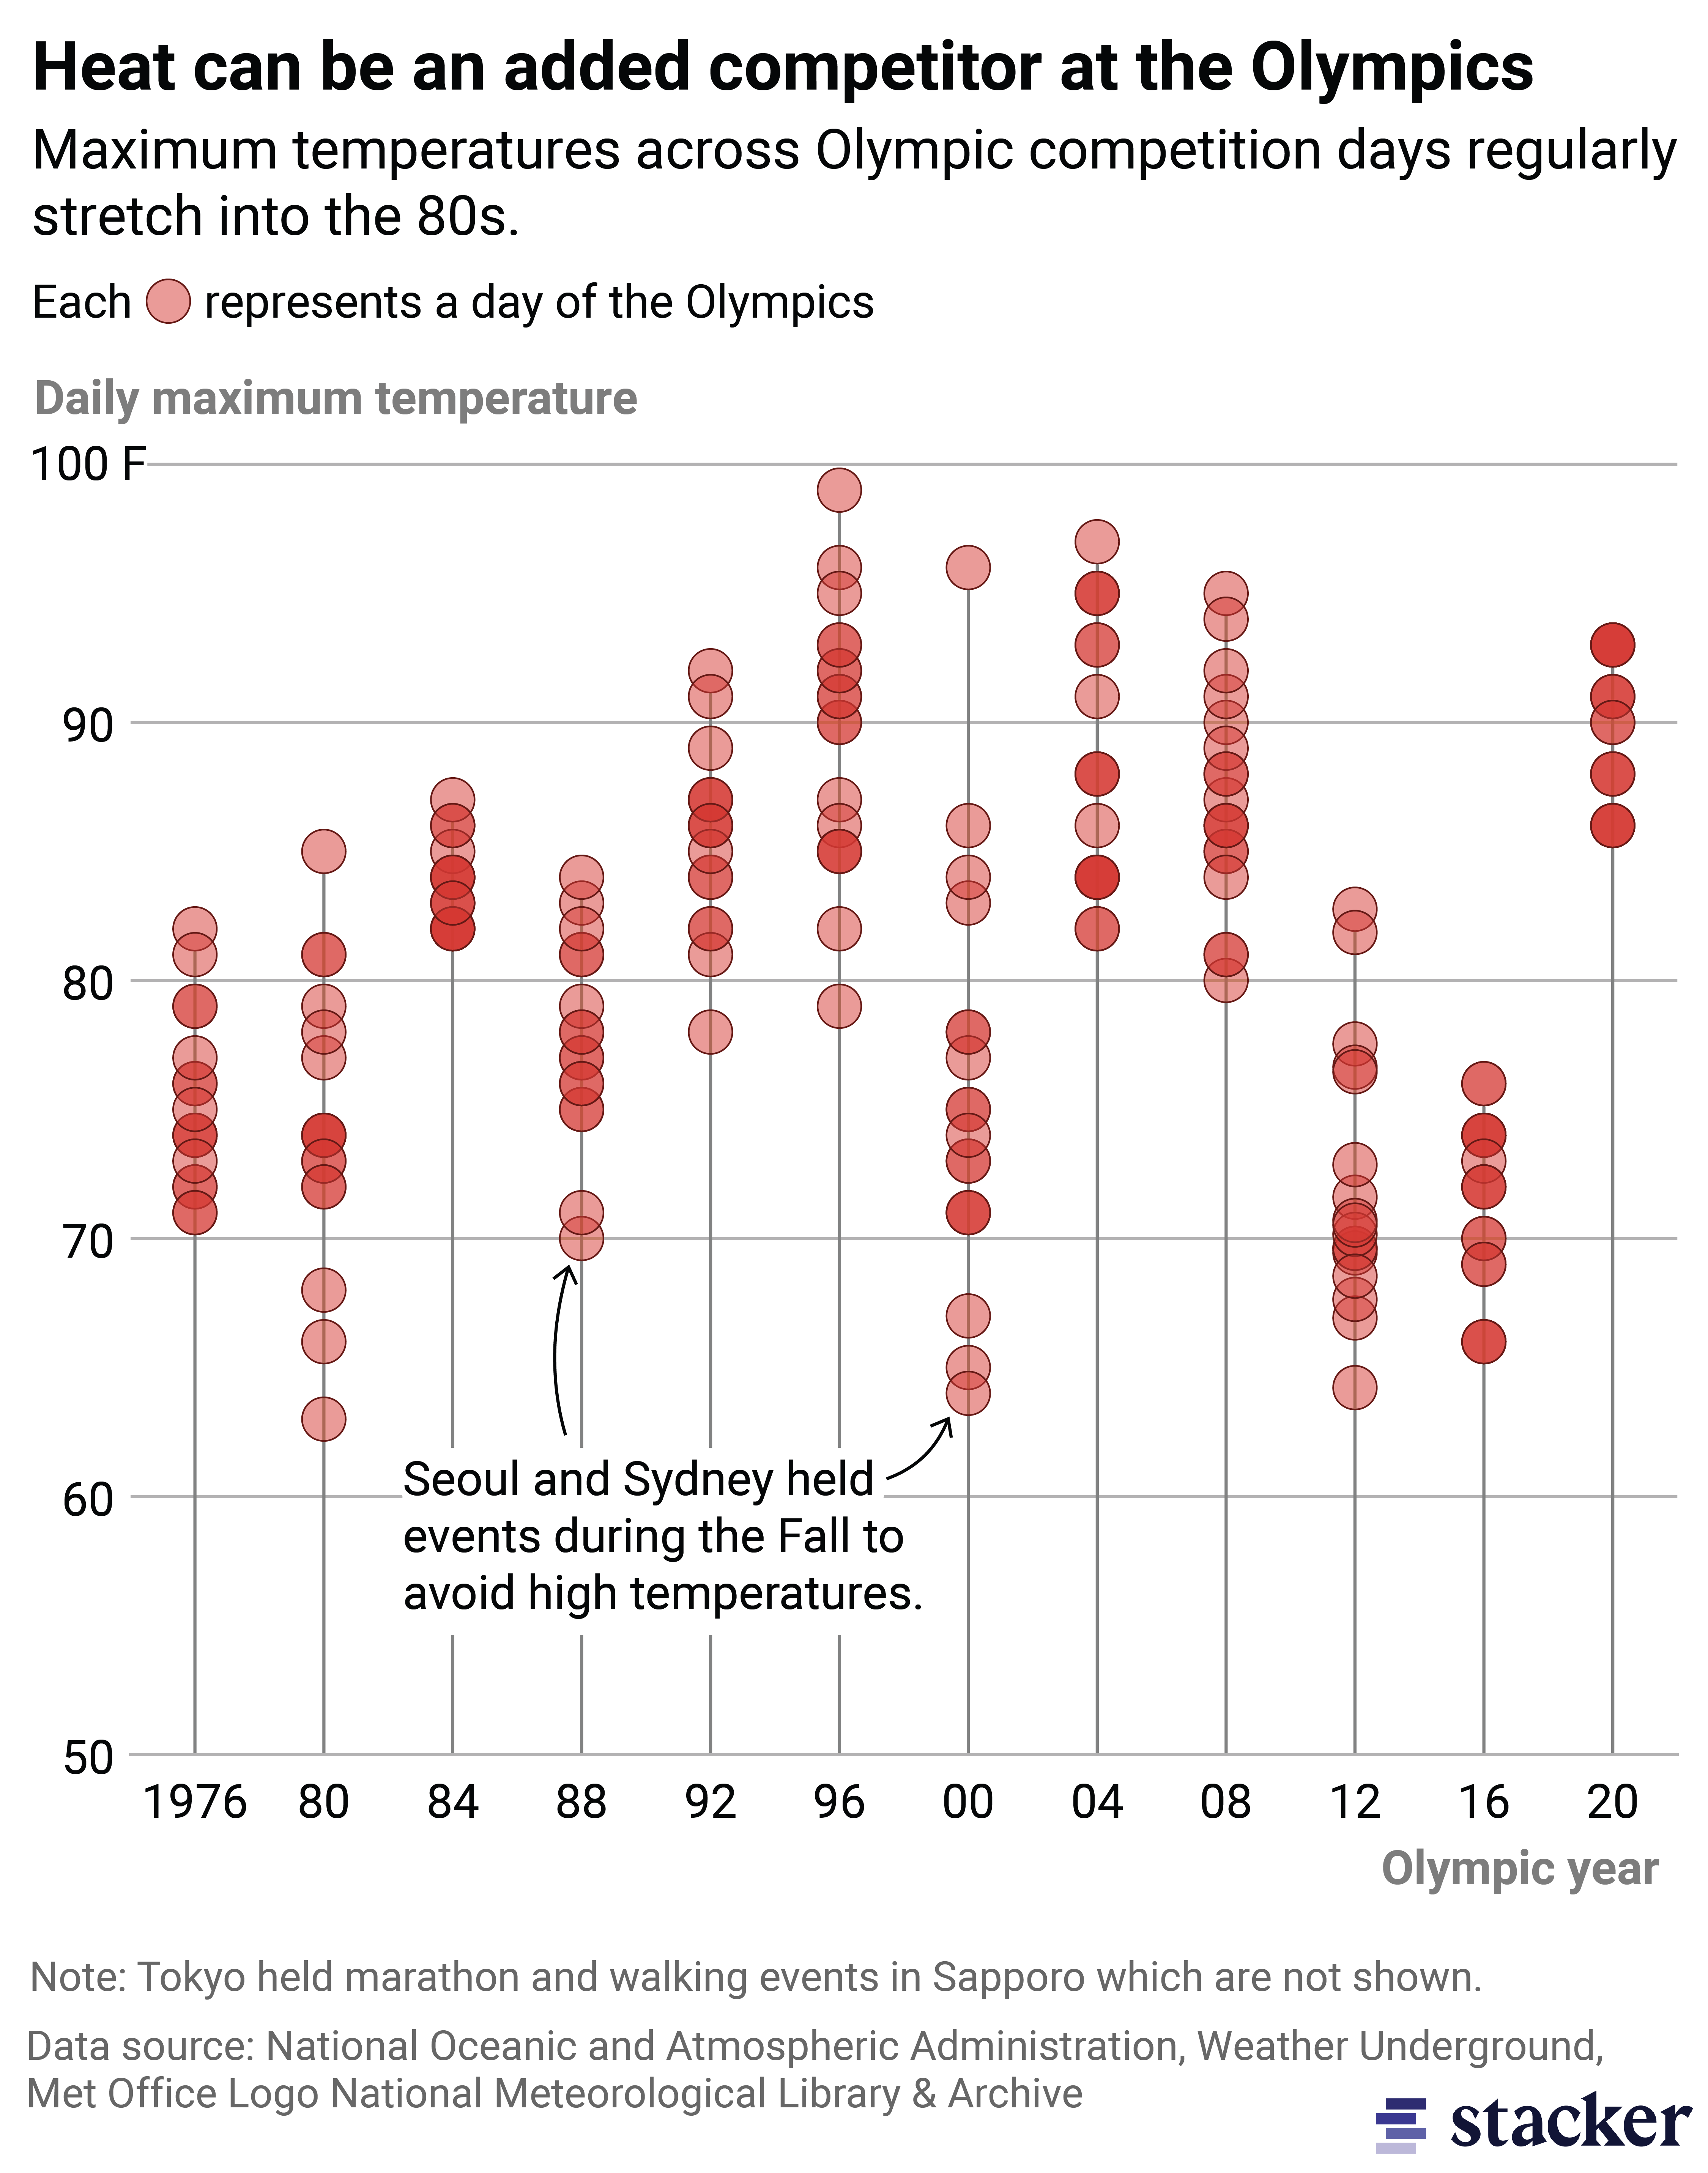 Chart showing daily maximum temperatures throughout past olympics. Atlanta in 1996 reported the highest temperature. Both Seoul and Sydney held events in the fall to avoid heat.